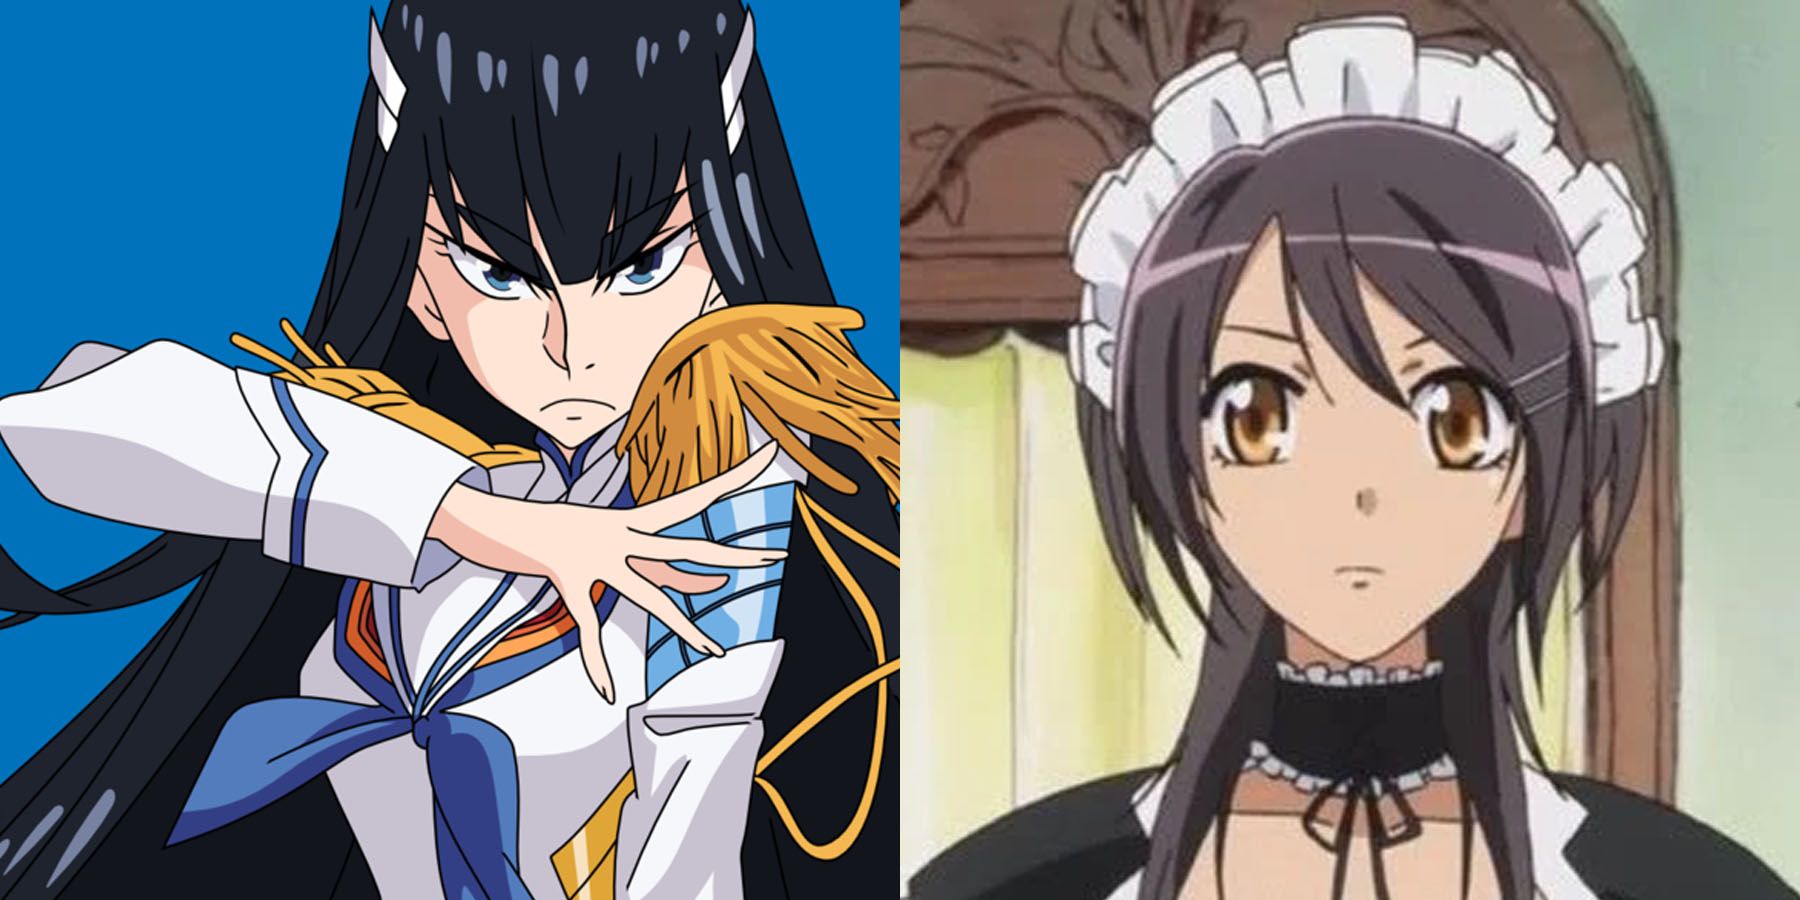 Top 10 Harem Anime Where The Main Character Is A Transfer Student